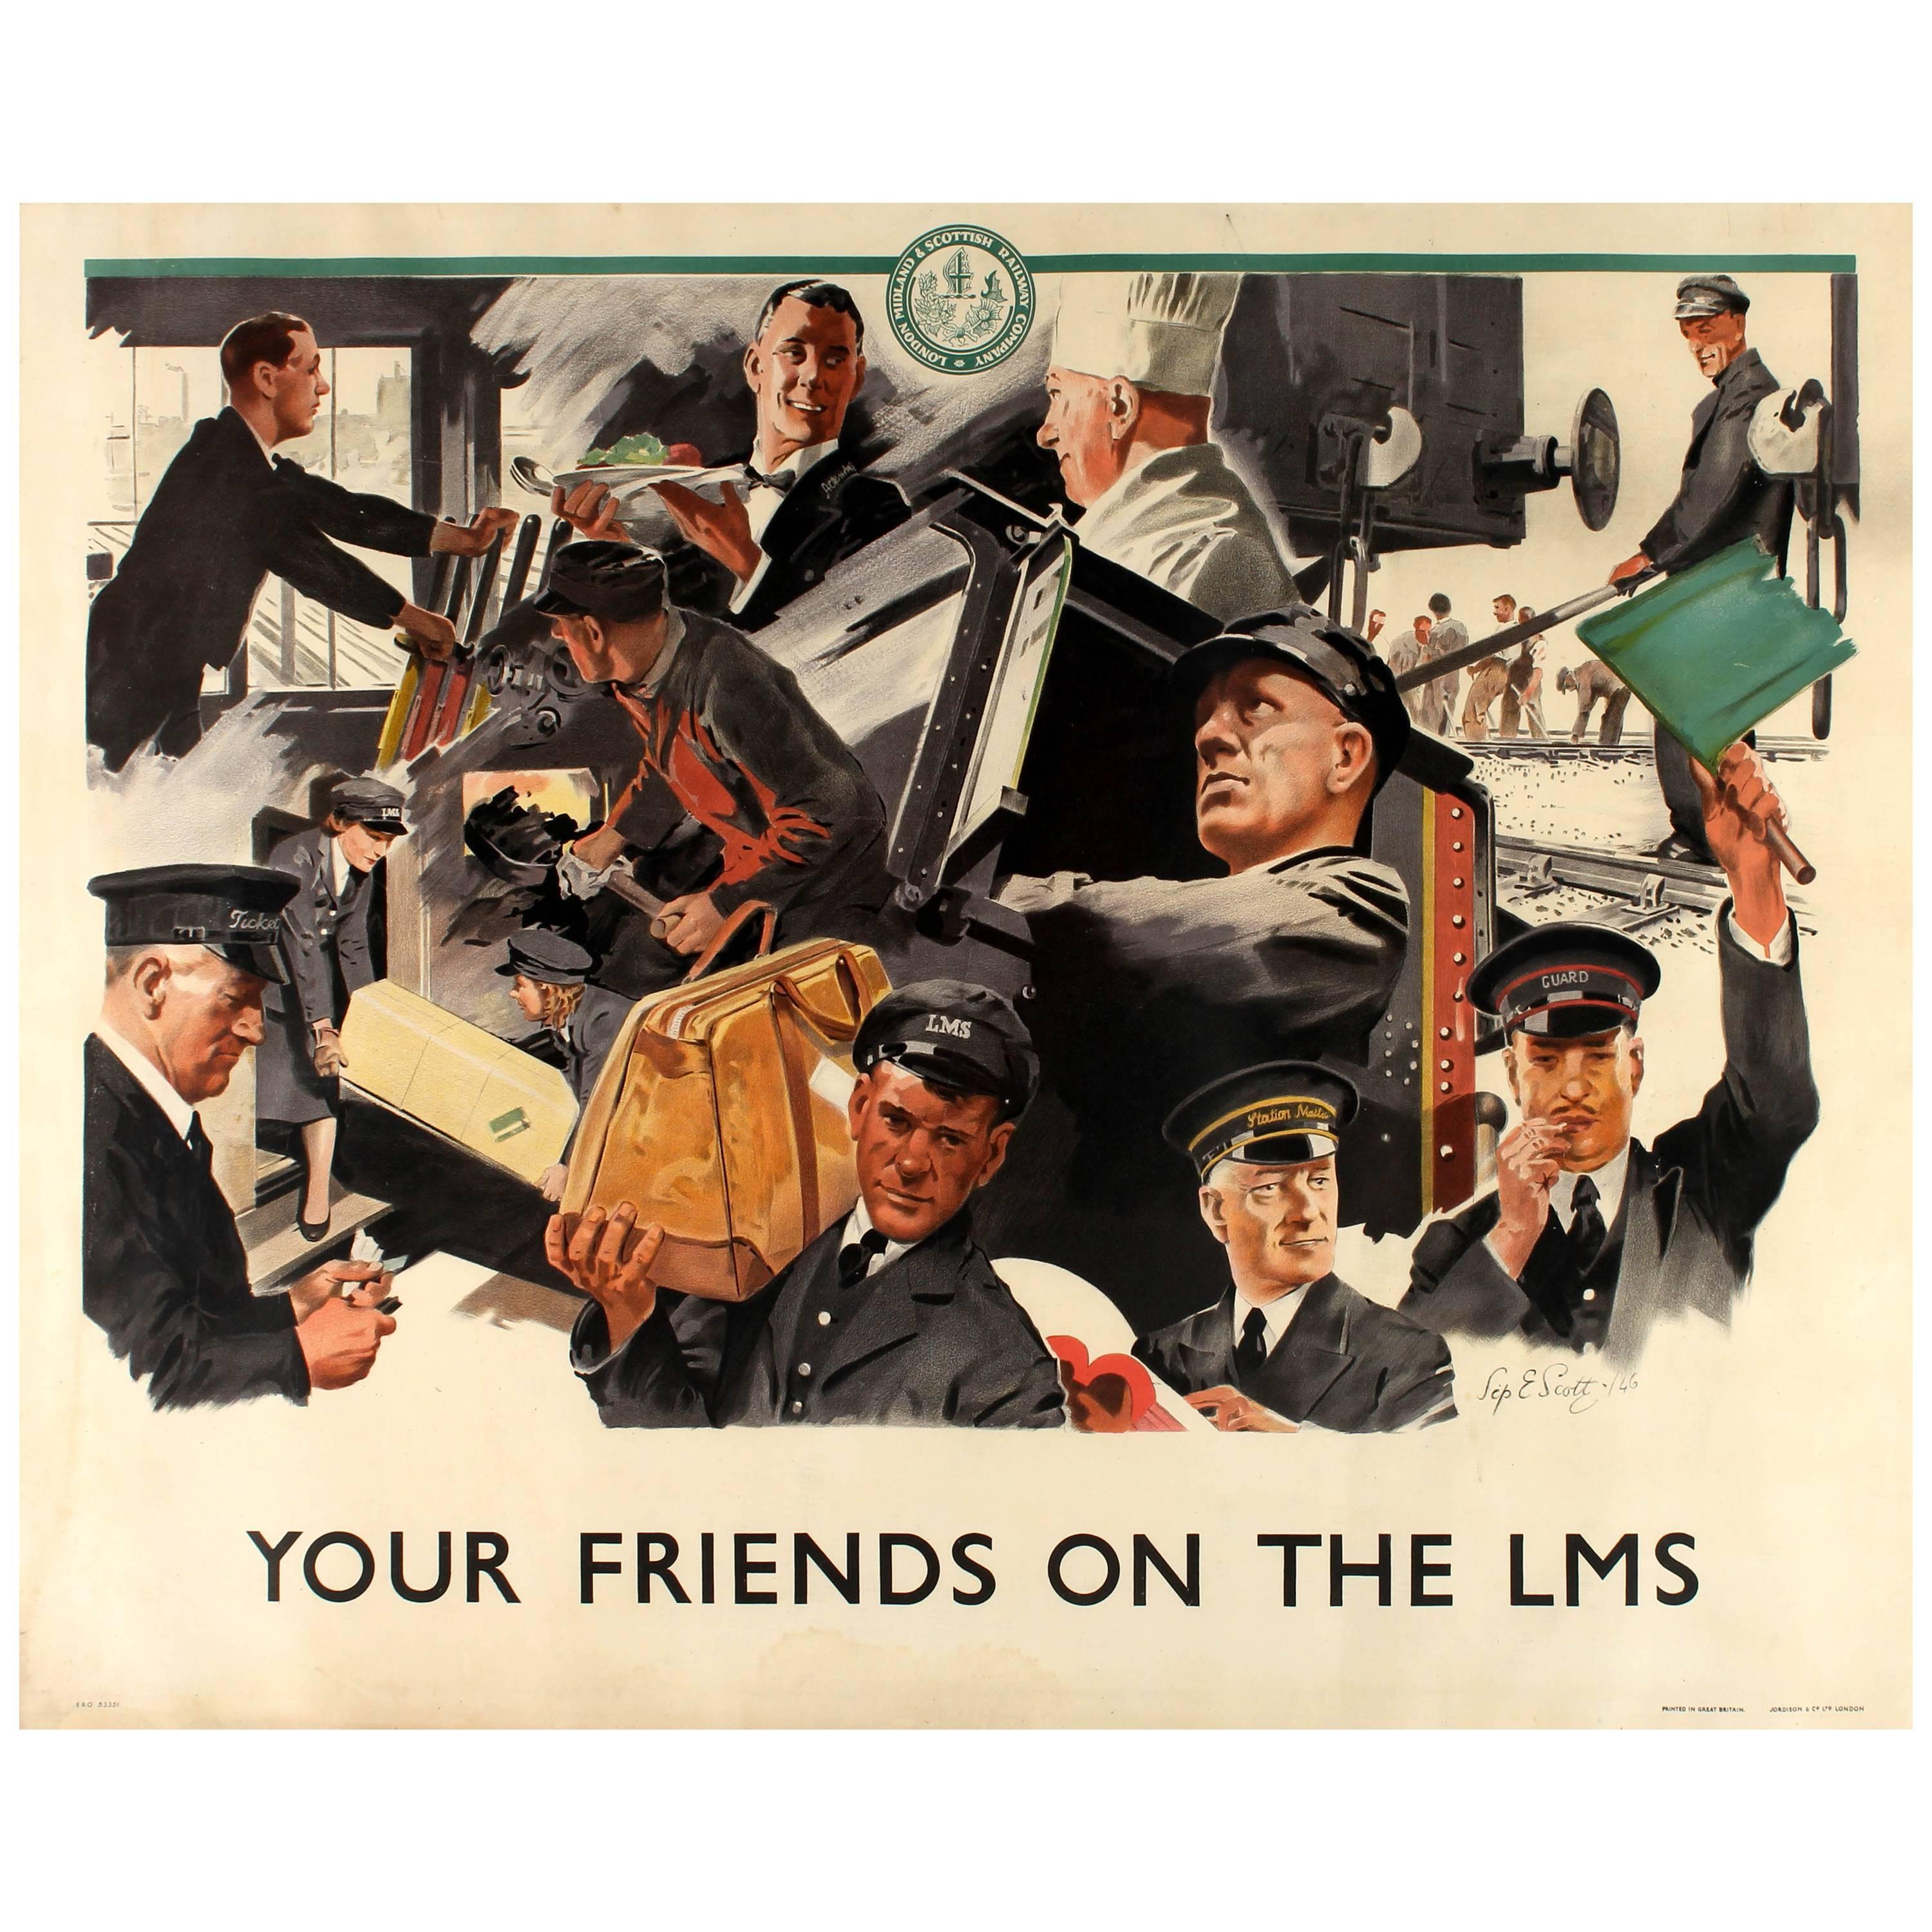 Original London Midland and Scottish Railway Poster "Your Friends On The LMS"